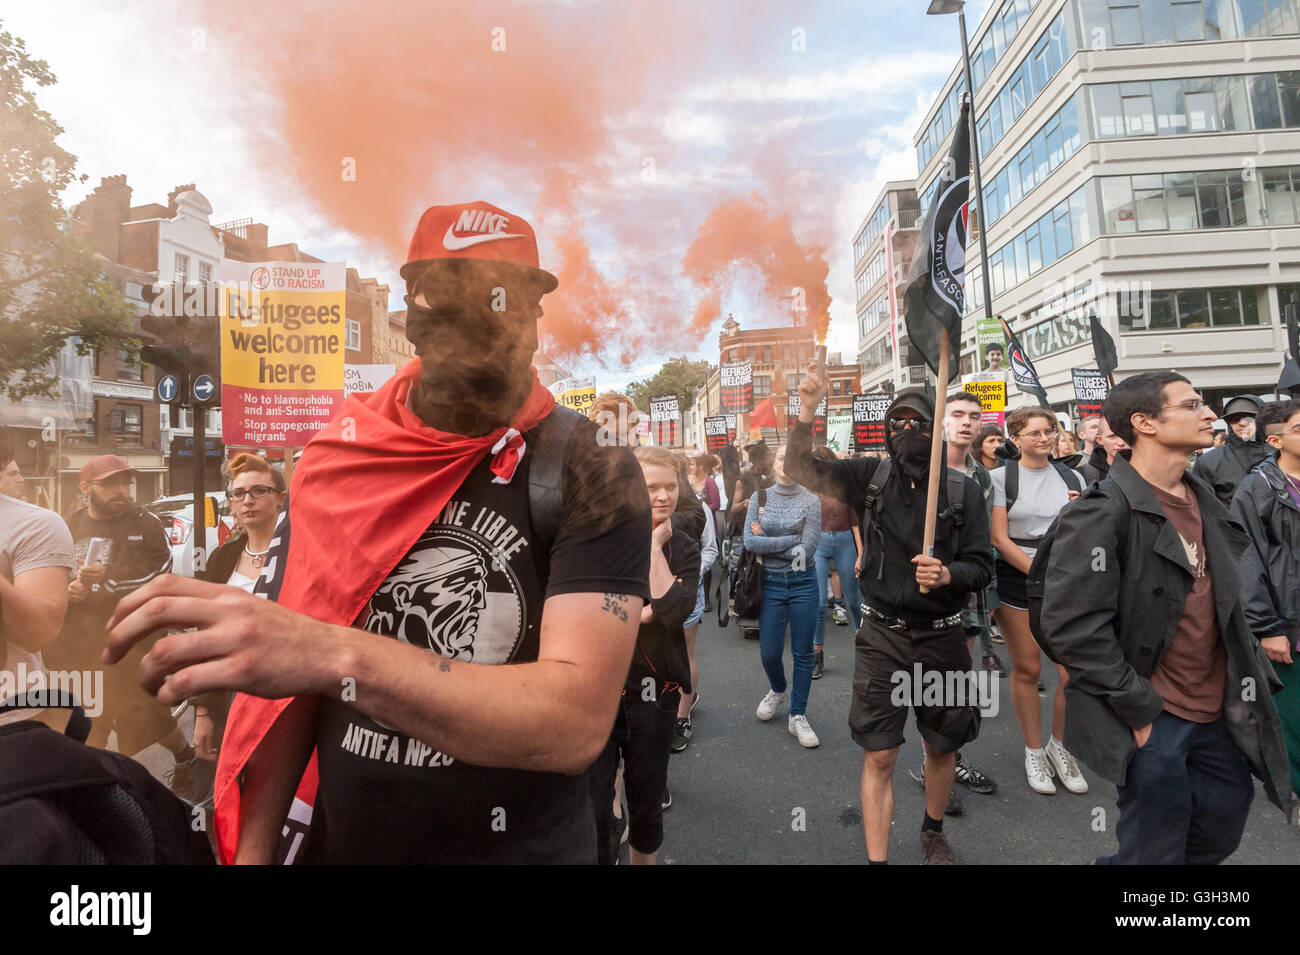 London, UK. June 24th 2016. Flares are set off on the long march from Altab Ali Park to the offices of News International on the day after the UK voted to leave the EU. They were protesting against racism, for migrant rights and against fascist violence and argue that migration and immigrants have been attacked and scapegoated not only by both Remain and Leave campaigns but by mainstream parties and media over more than 20 years, stoking up hatred by insisting immigrants are a 'problem'. Peter Marshall/Alamy Live News Stock Photo